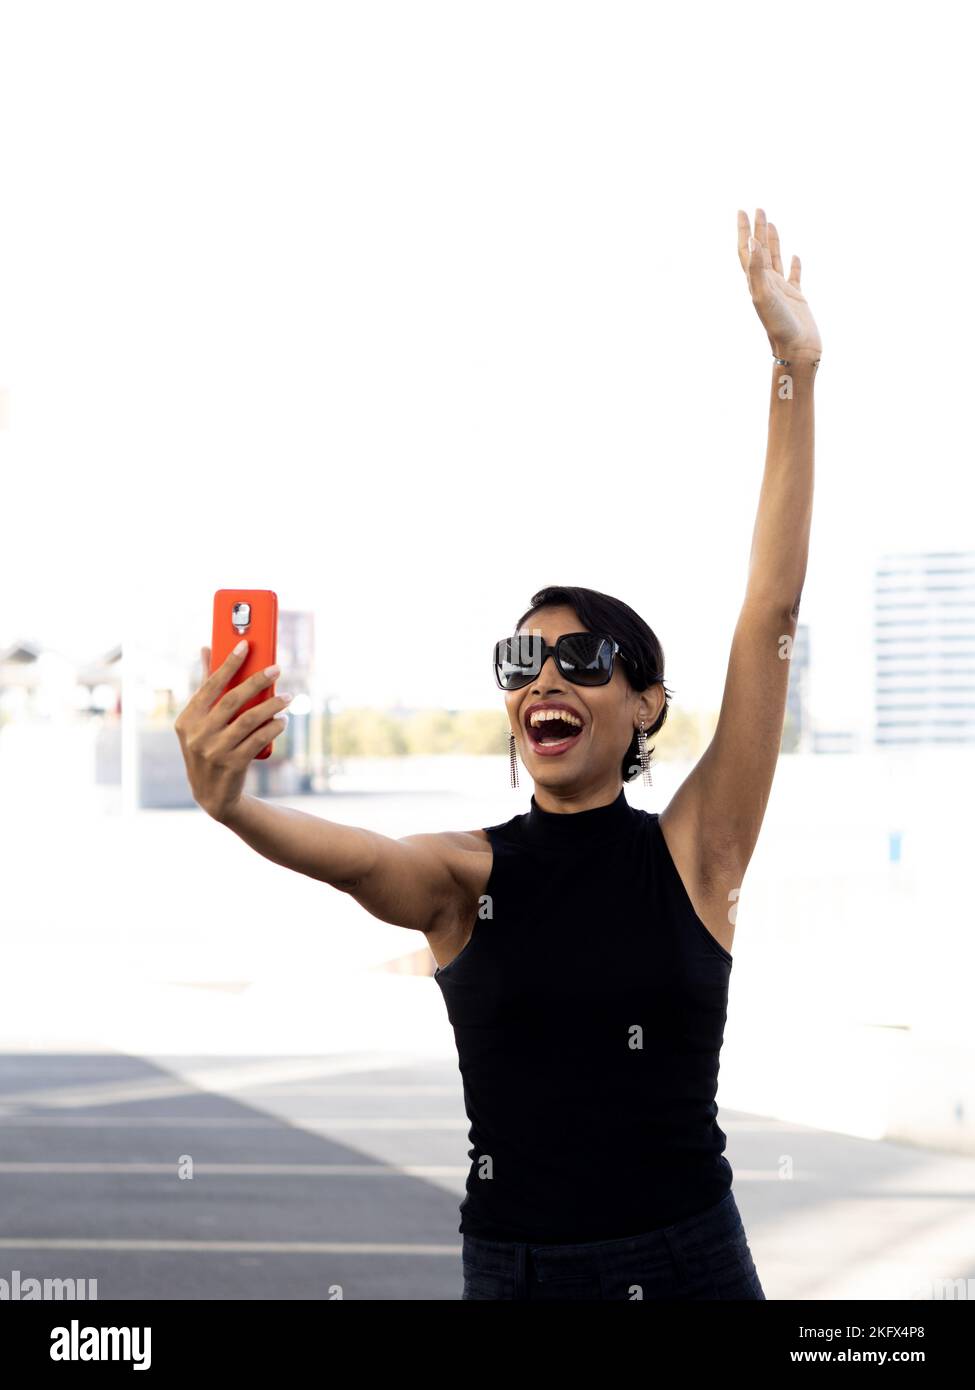 Smiling transgender woman taking a selfie in a city Stock Photo